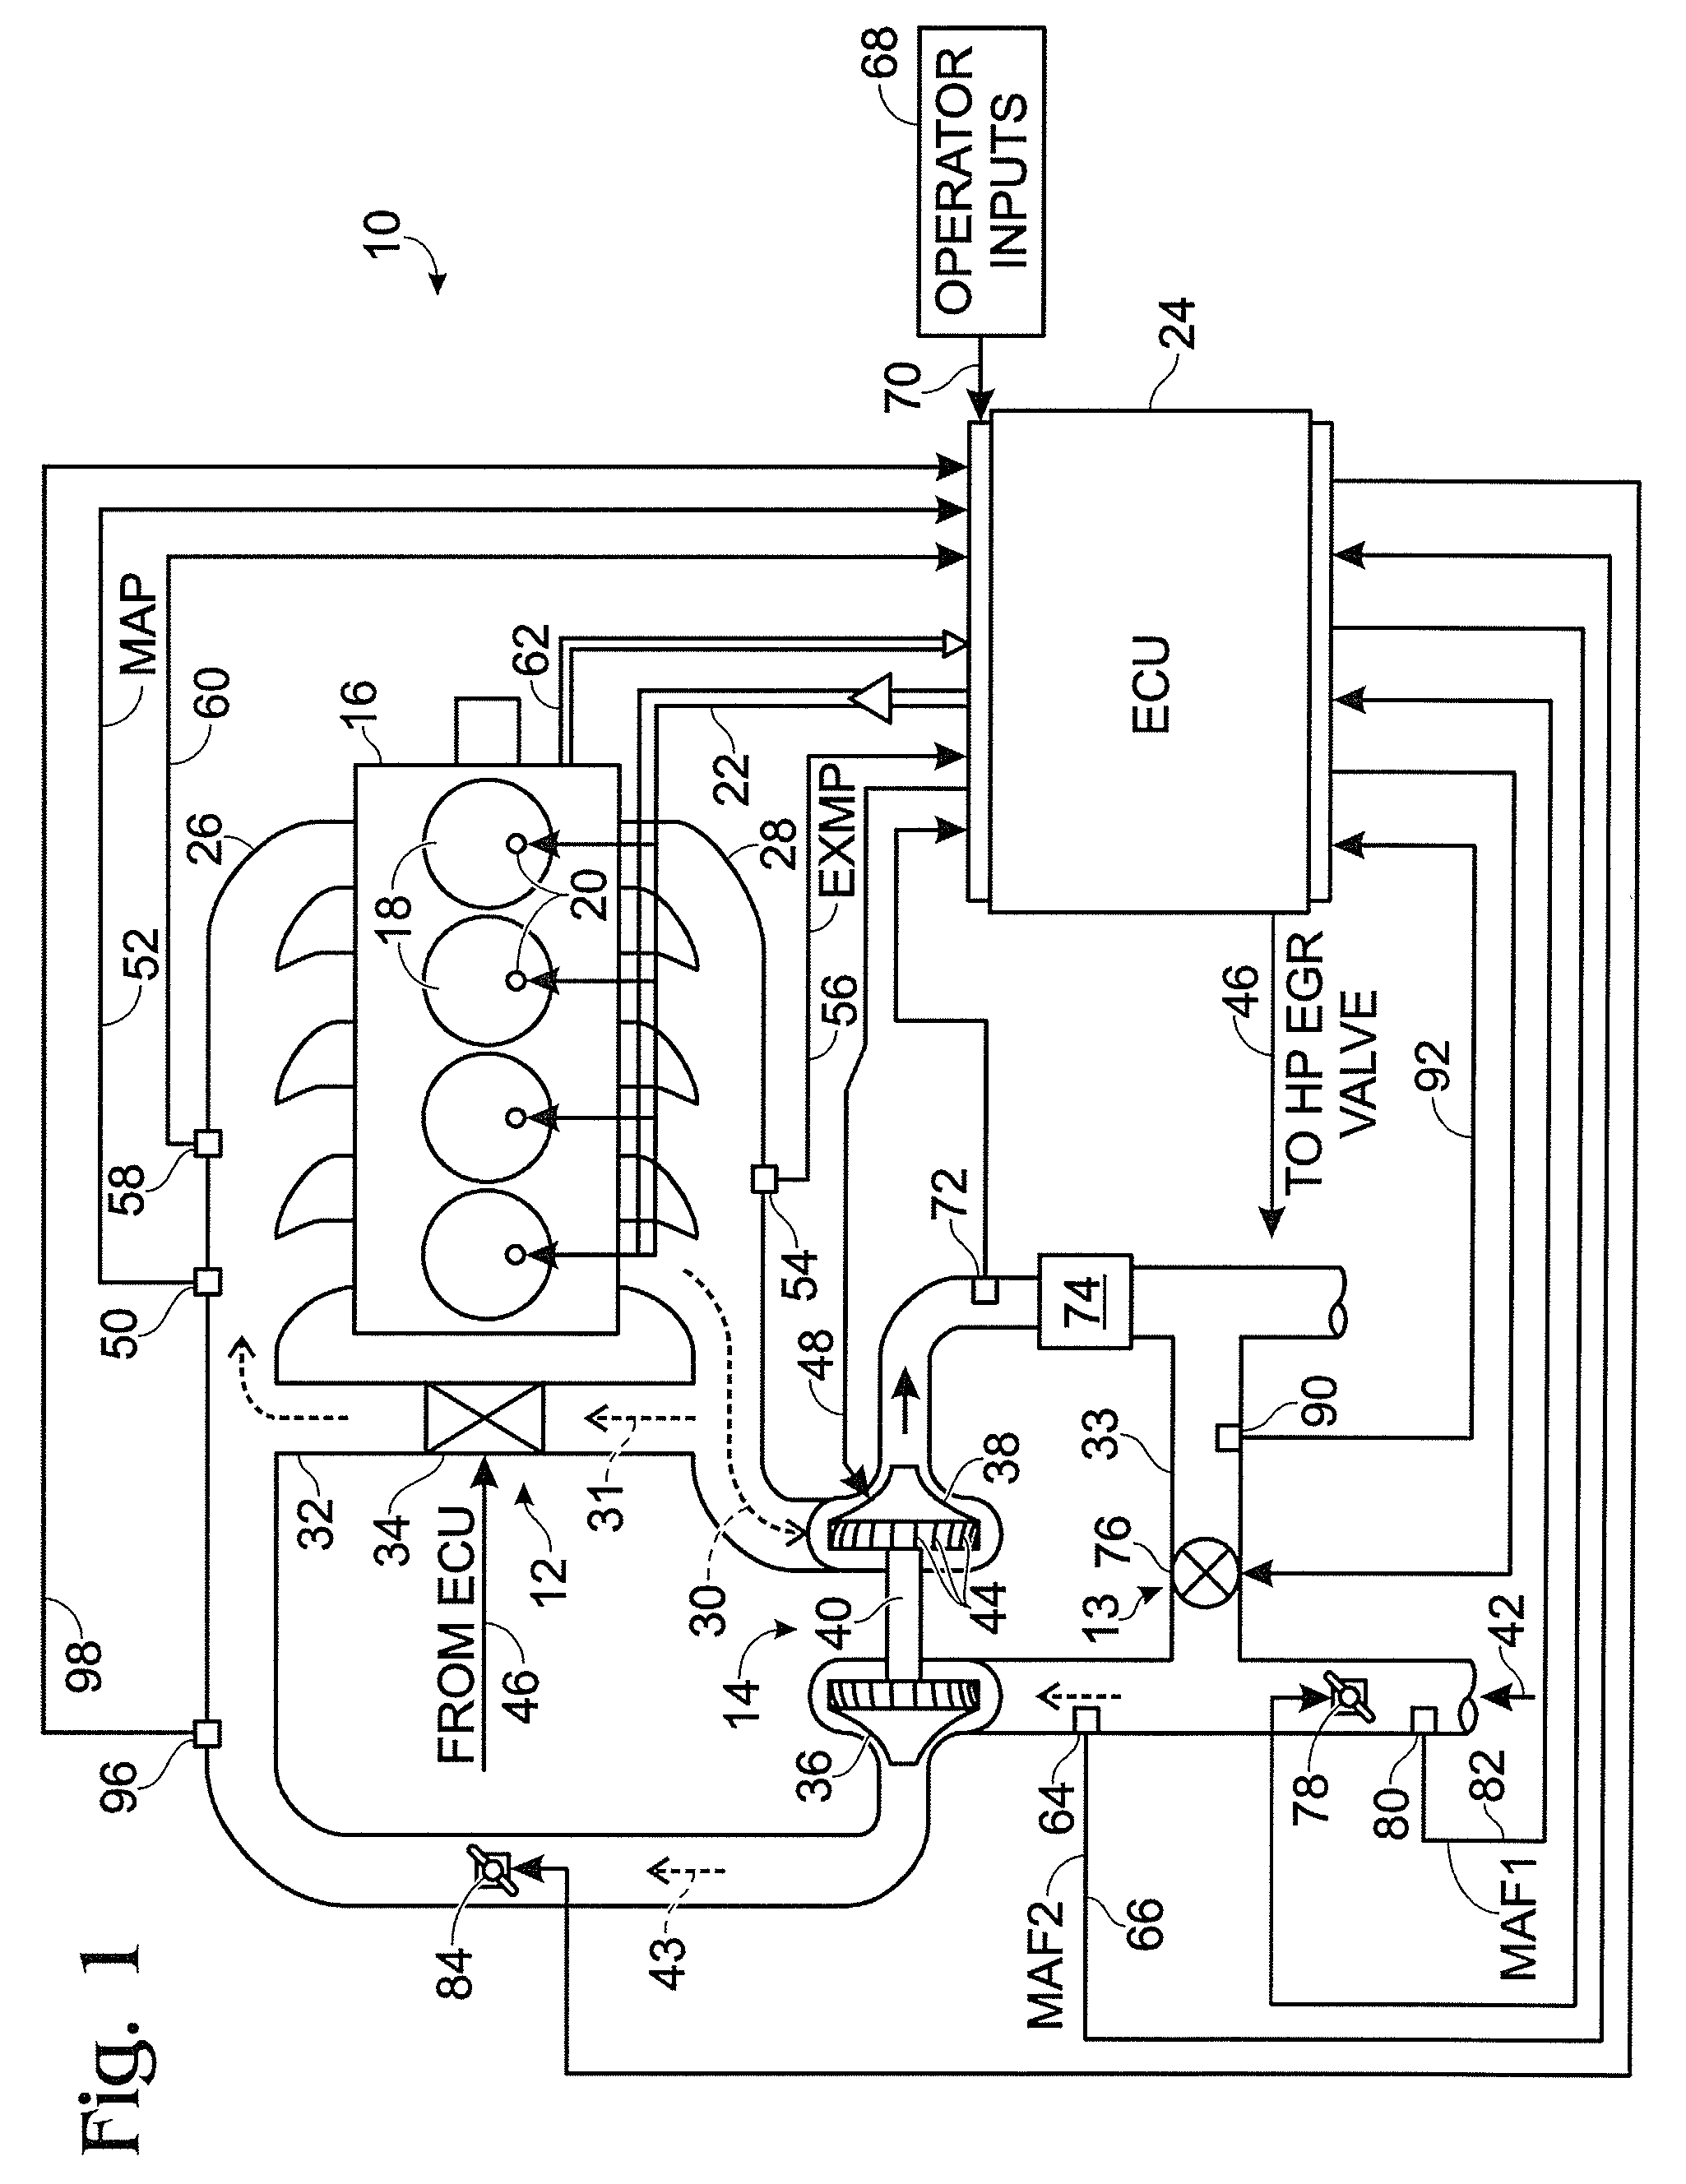 System and method for diagnostic of low pressure exhaust gas recirculation system and adapting of measurement devices